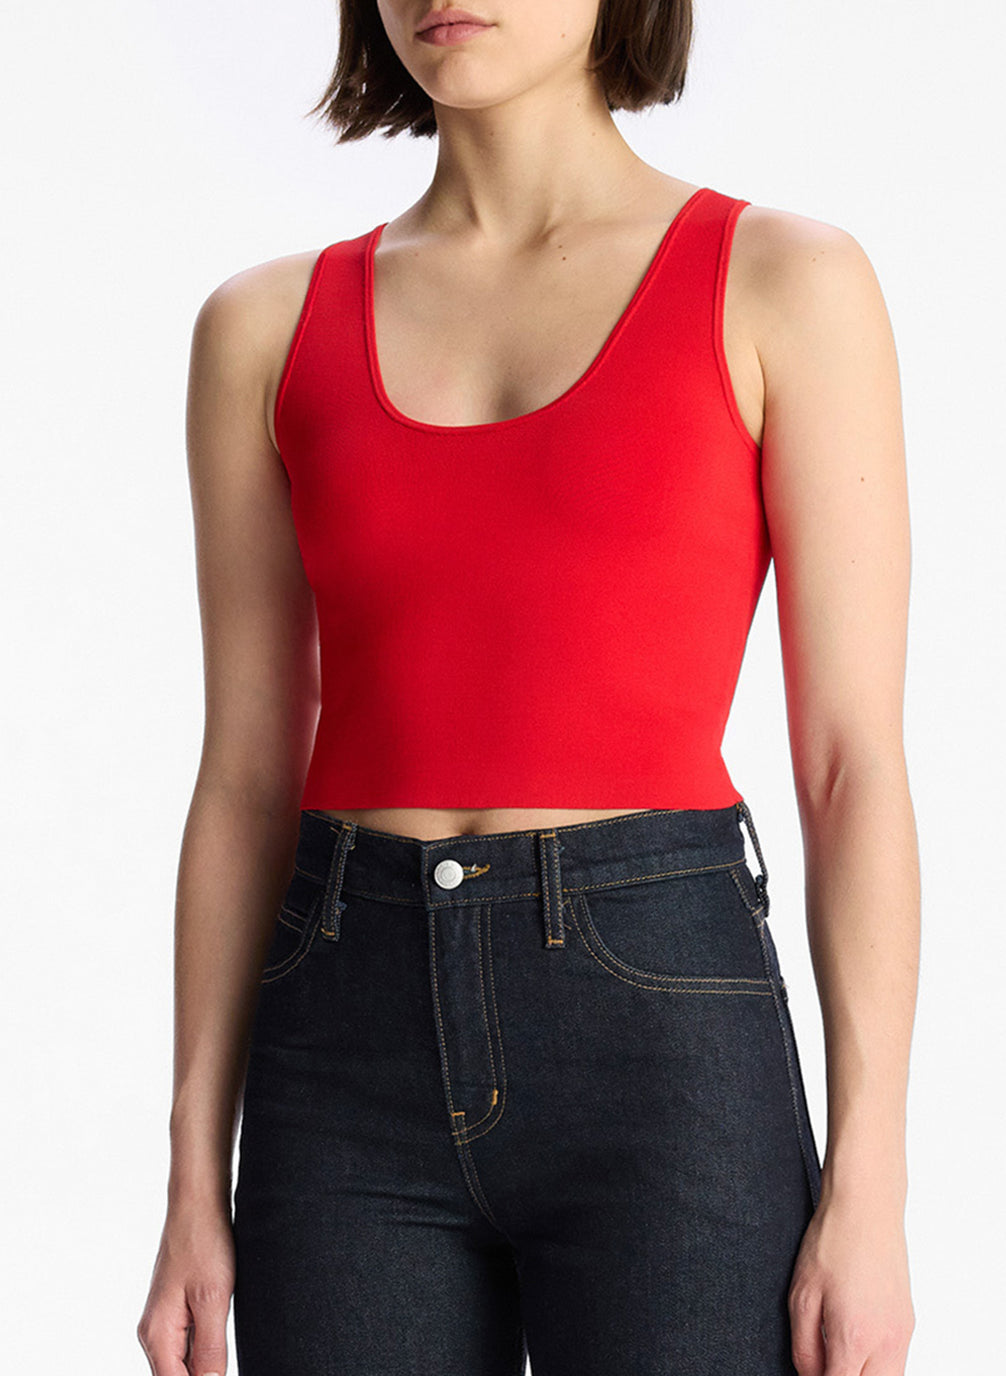 detail view of woman wearing red sleeveless top and dark wash denim jeans